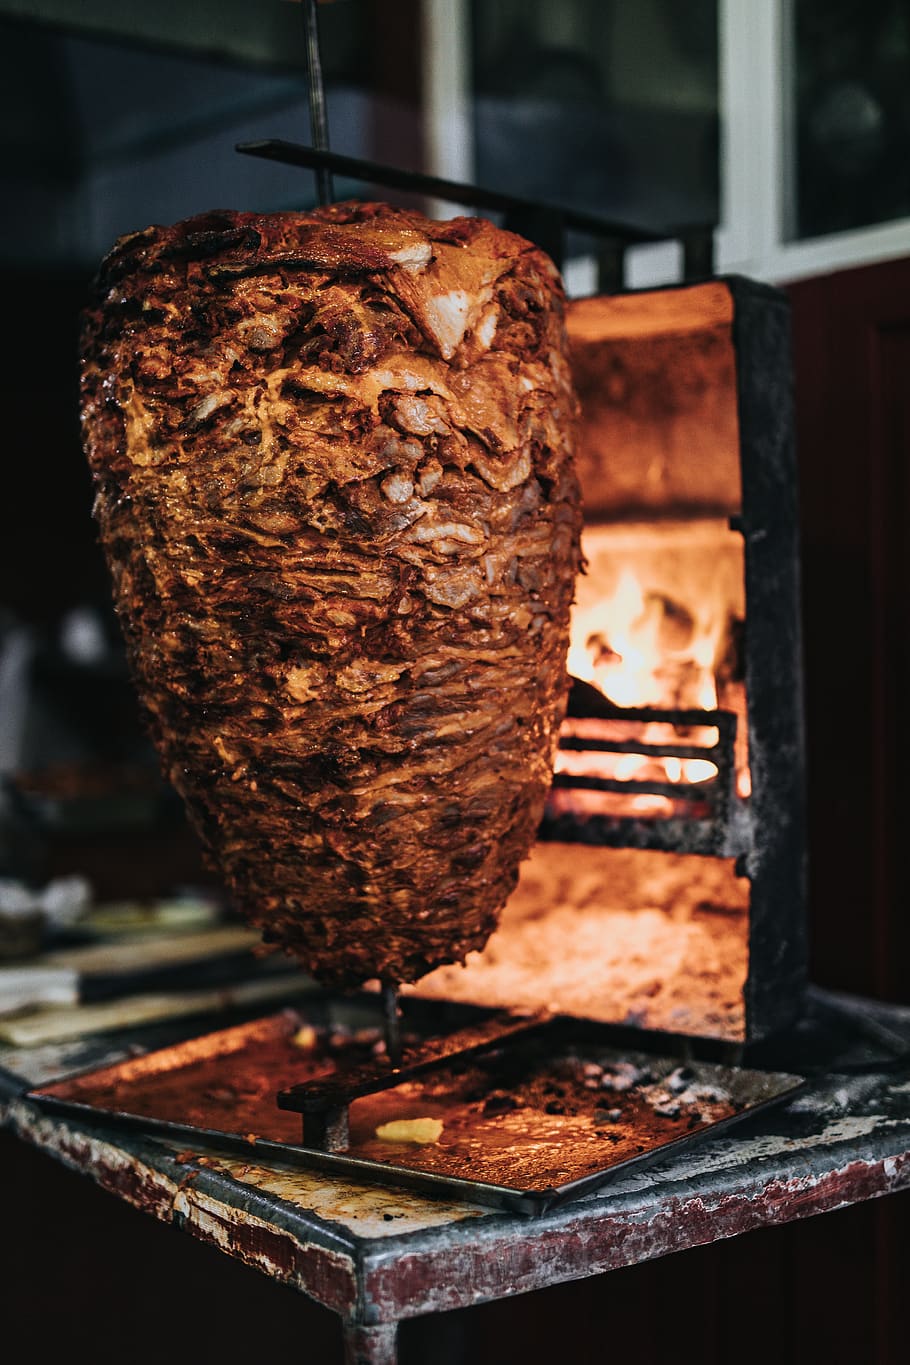 shawarma on a pit, indoors, fireplace, hearth, bread, food, ice cream